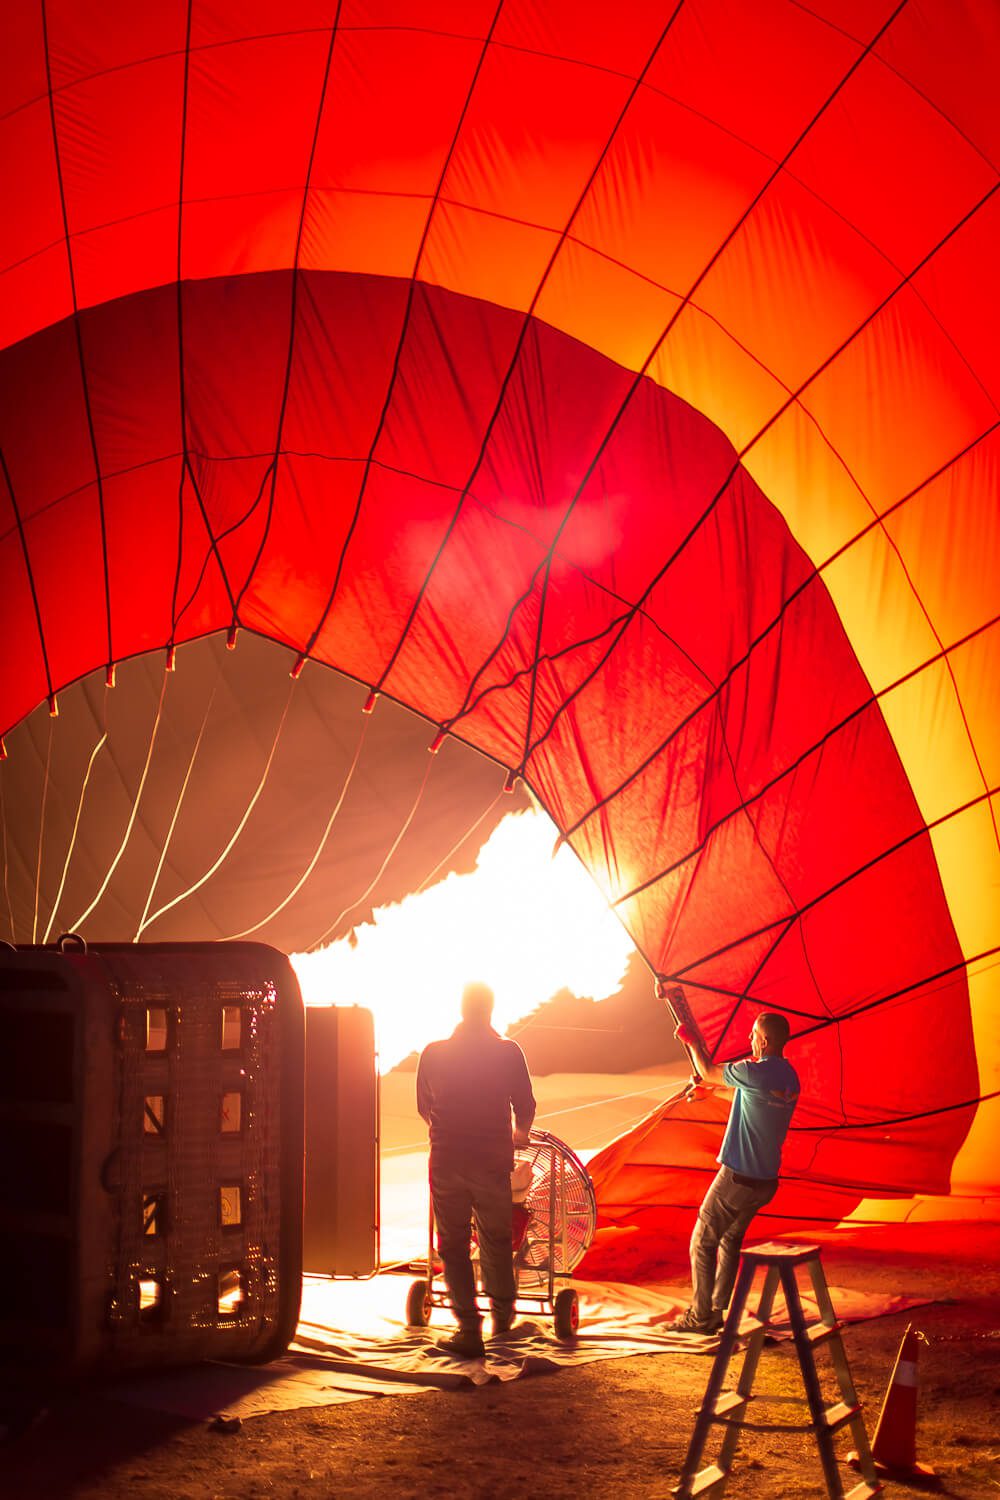 Blowing up the hot air balloon<br>
